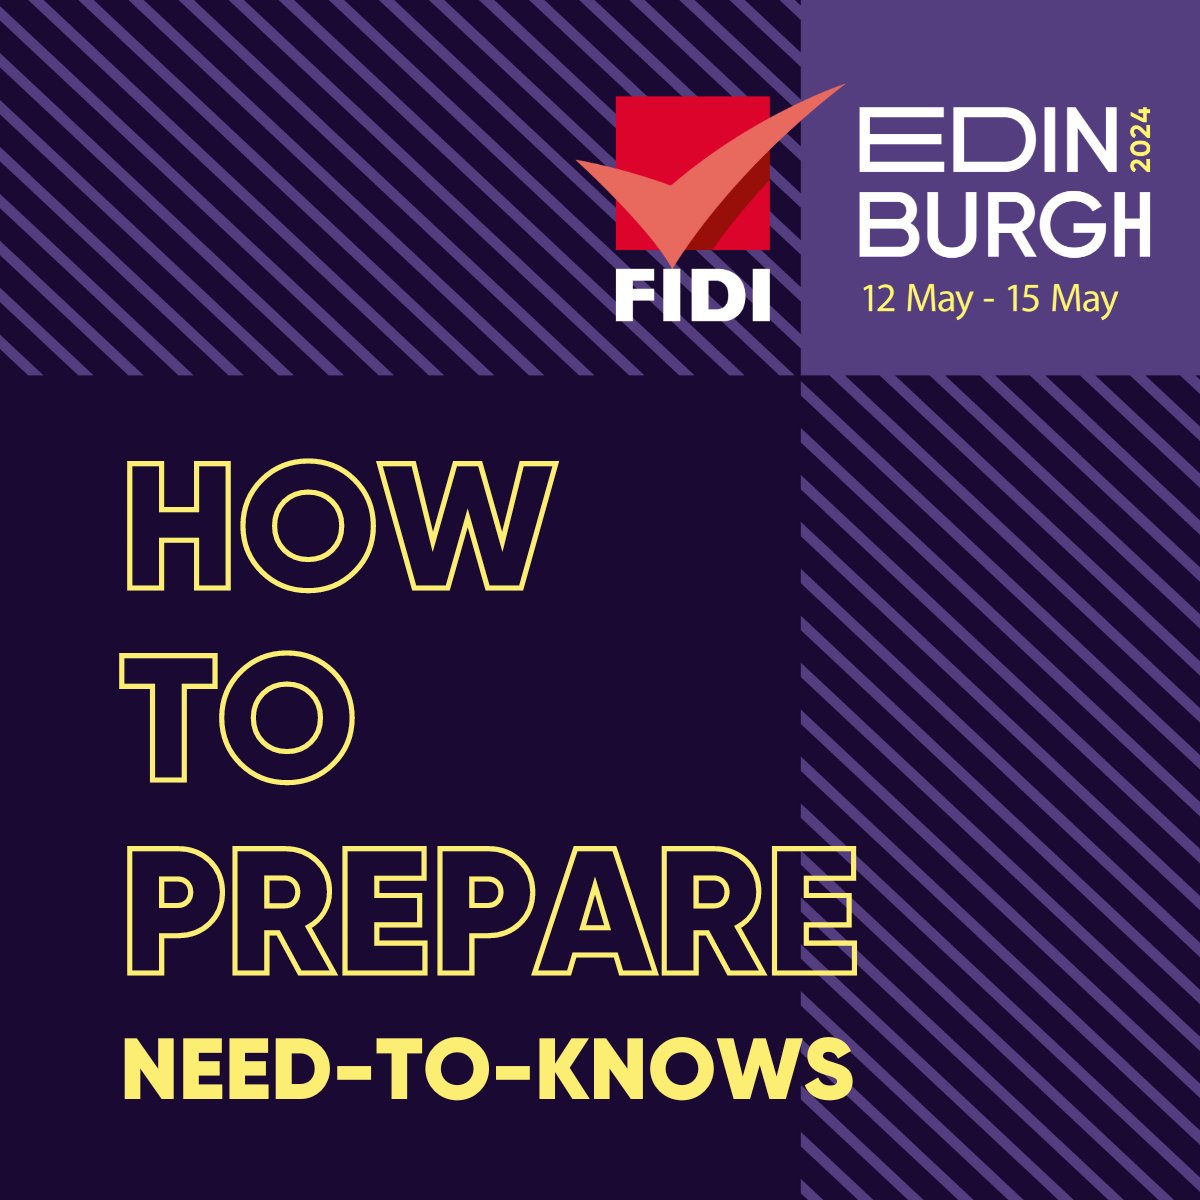 #2024FIDIconfernece : As the preparations reach their peak, we are sharing all the need-to-knows and how to prepare for the 2024 FIDI Conference in Edinburgh. 🔶Dress code, weather & transportation ➡️mailchi.mp/0e6de84d390d/i… 🔶This year’s programme ➡️ fidifocus.org/fidi-services/…